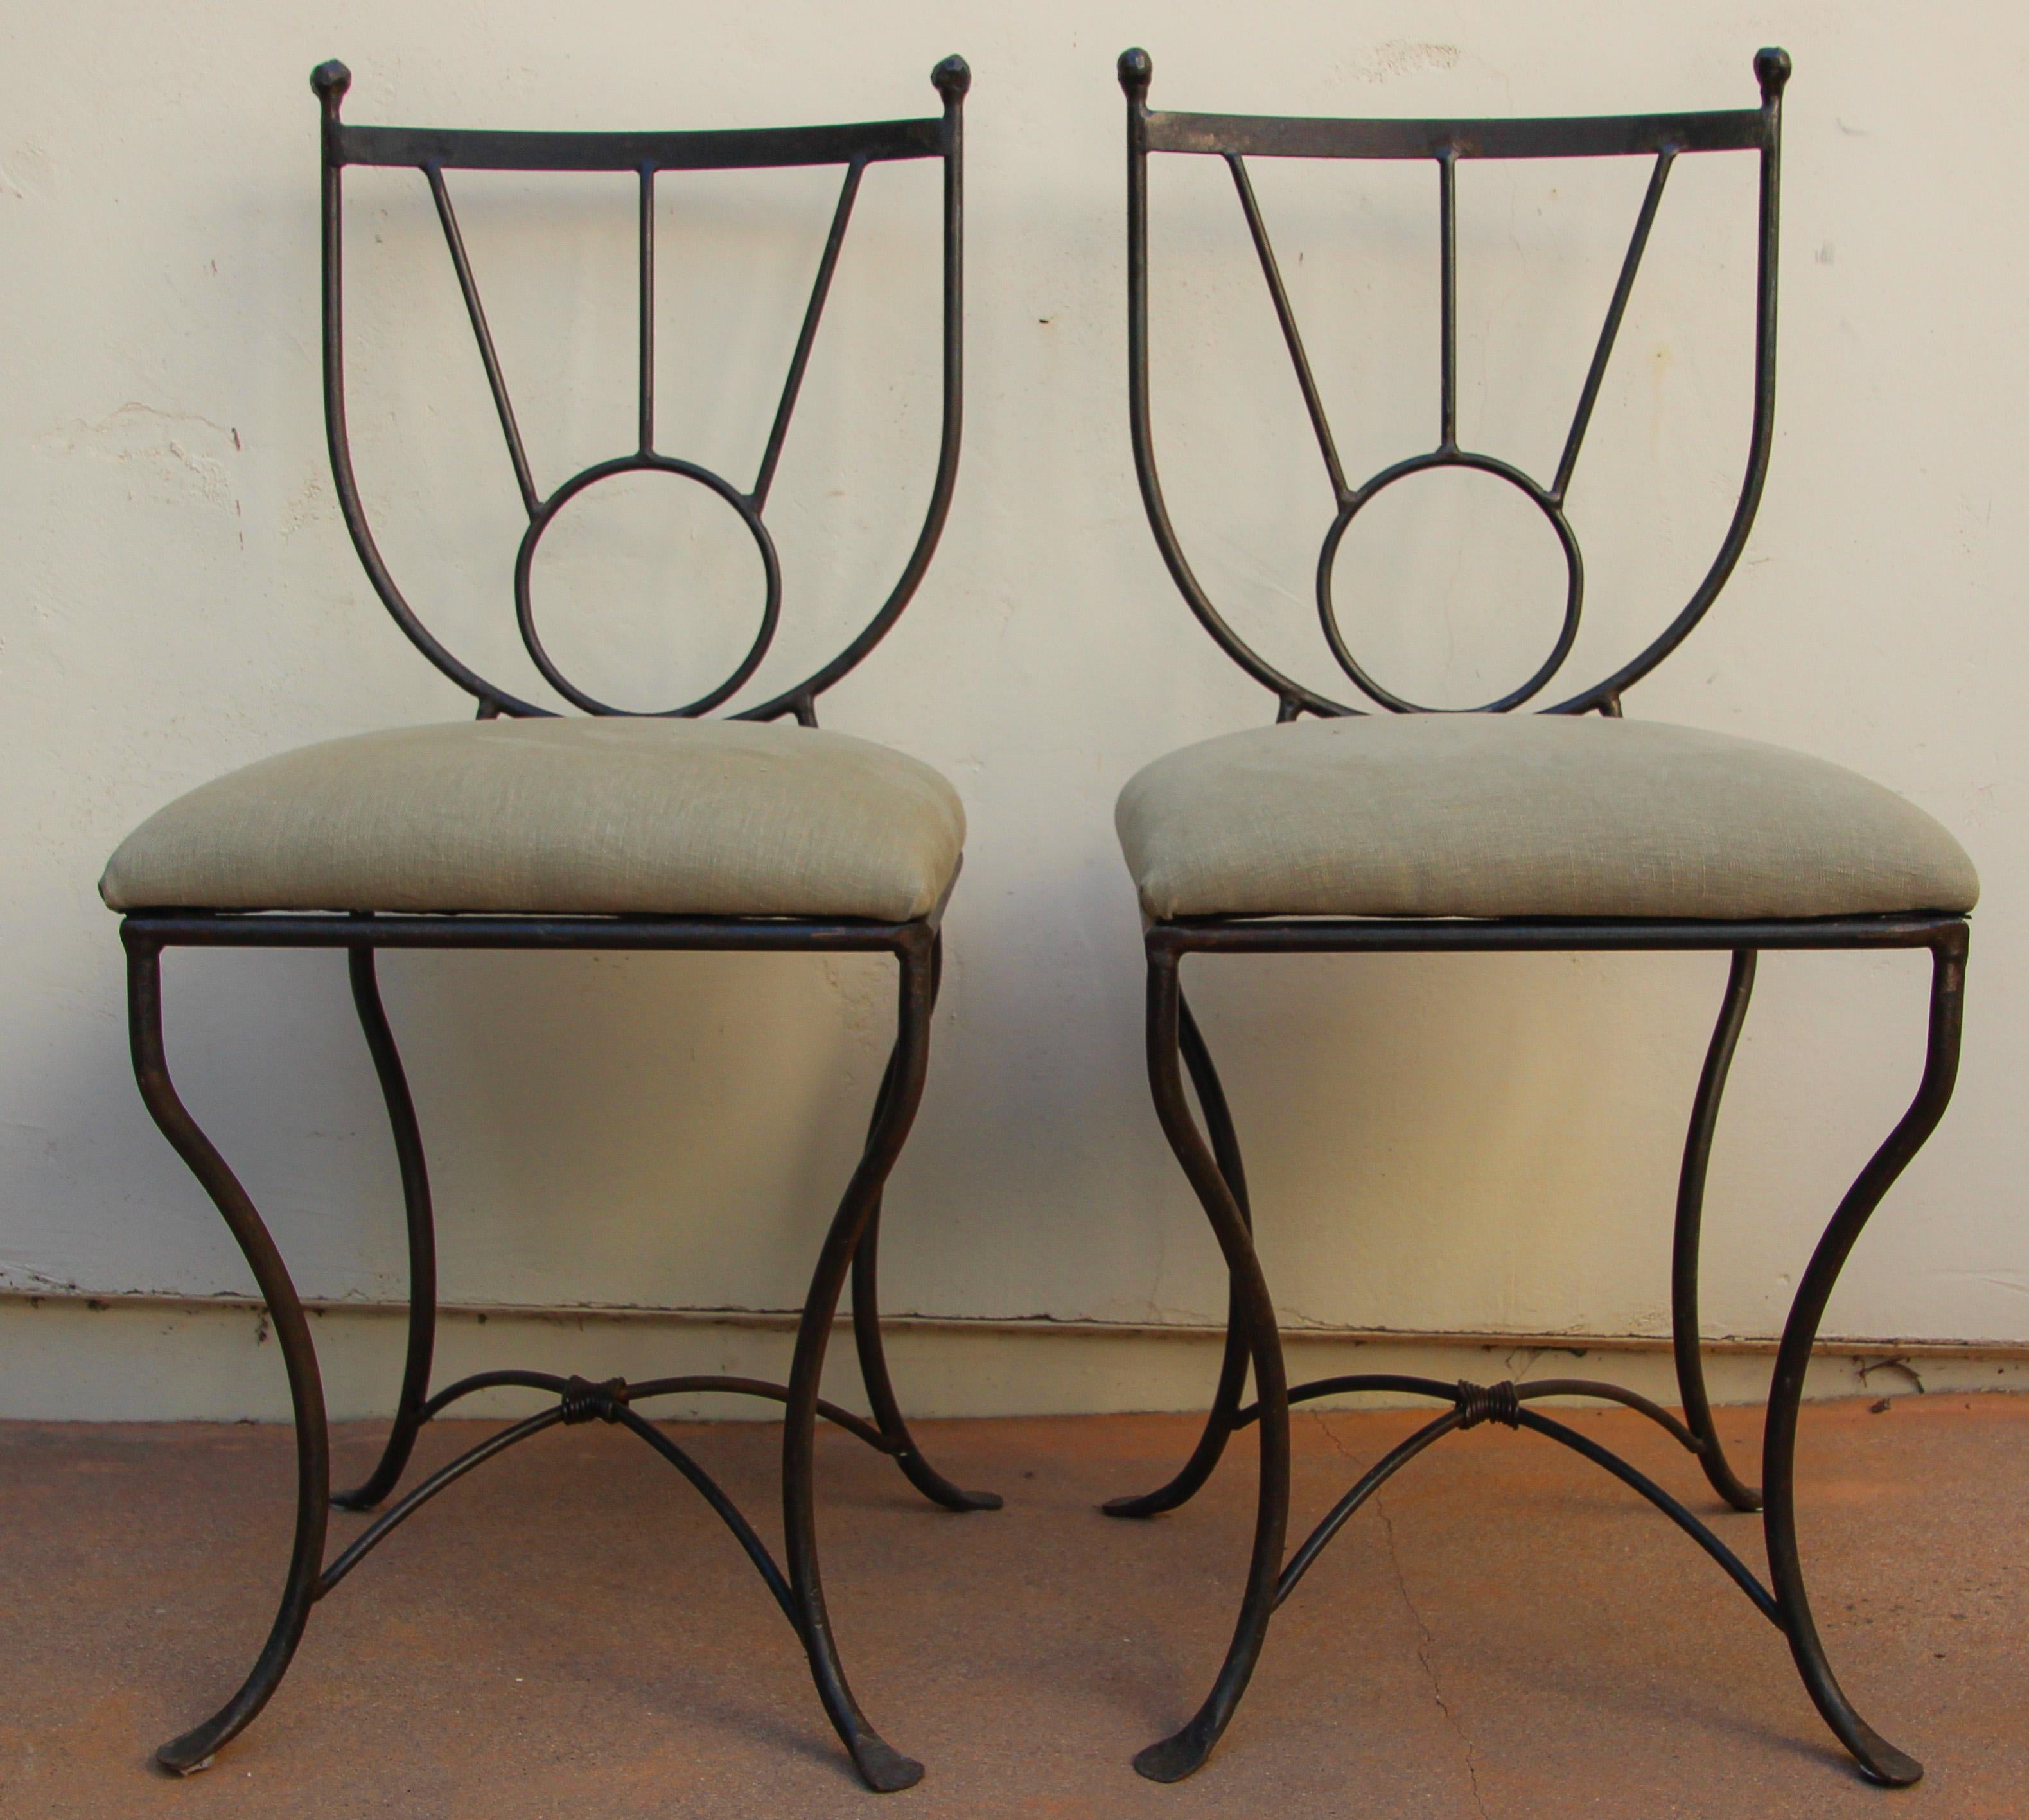 American Outdoor Wrought Iron Chairs Set of Four in Mario Papperzini Style